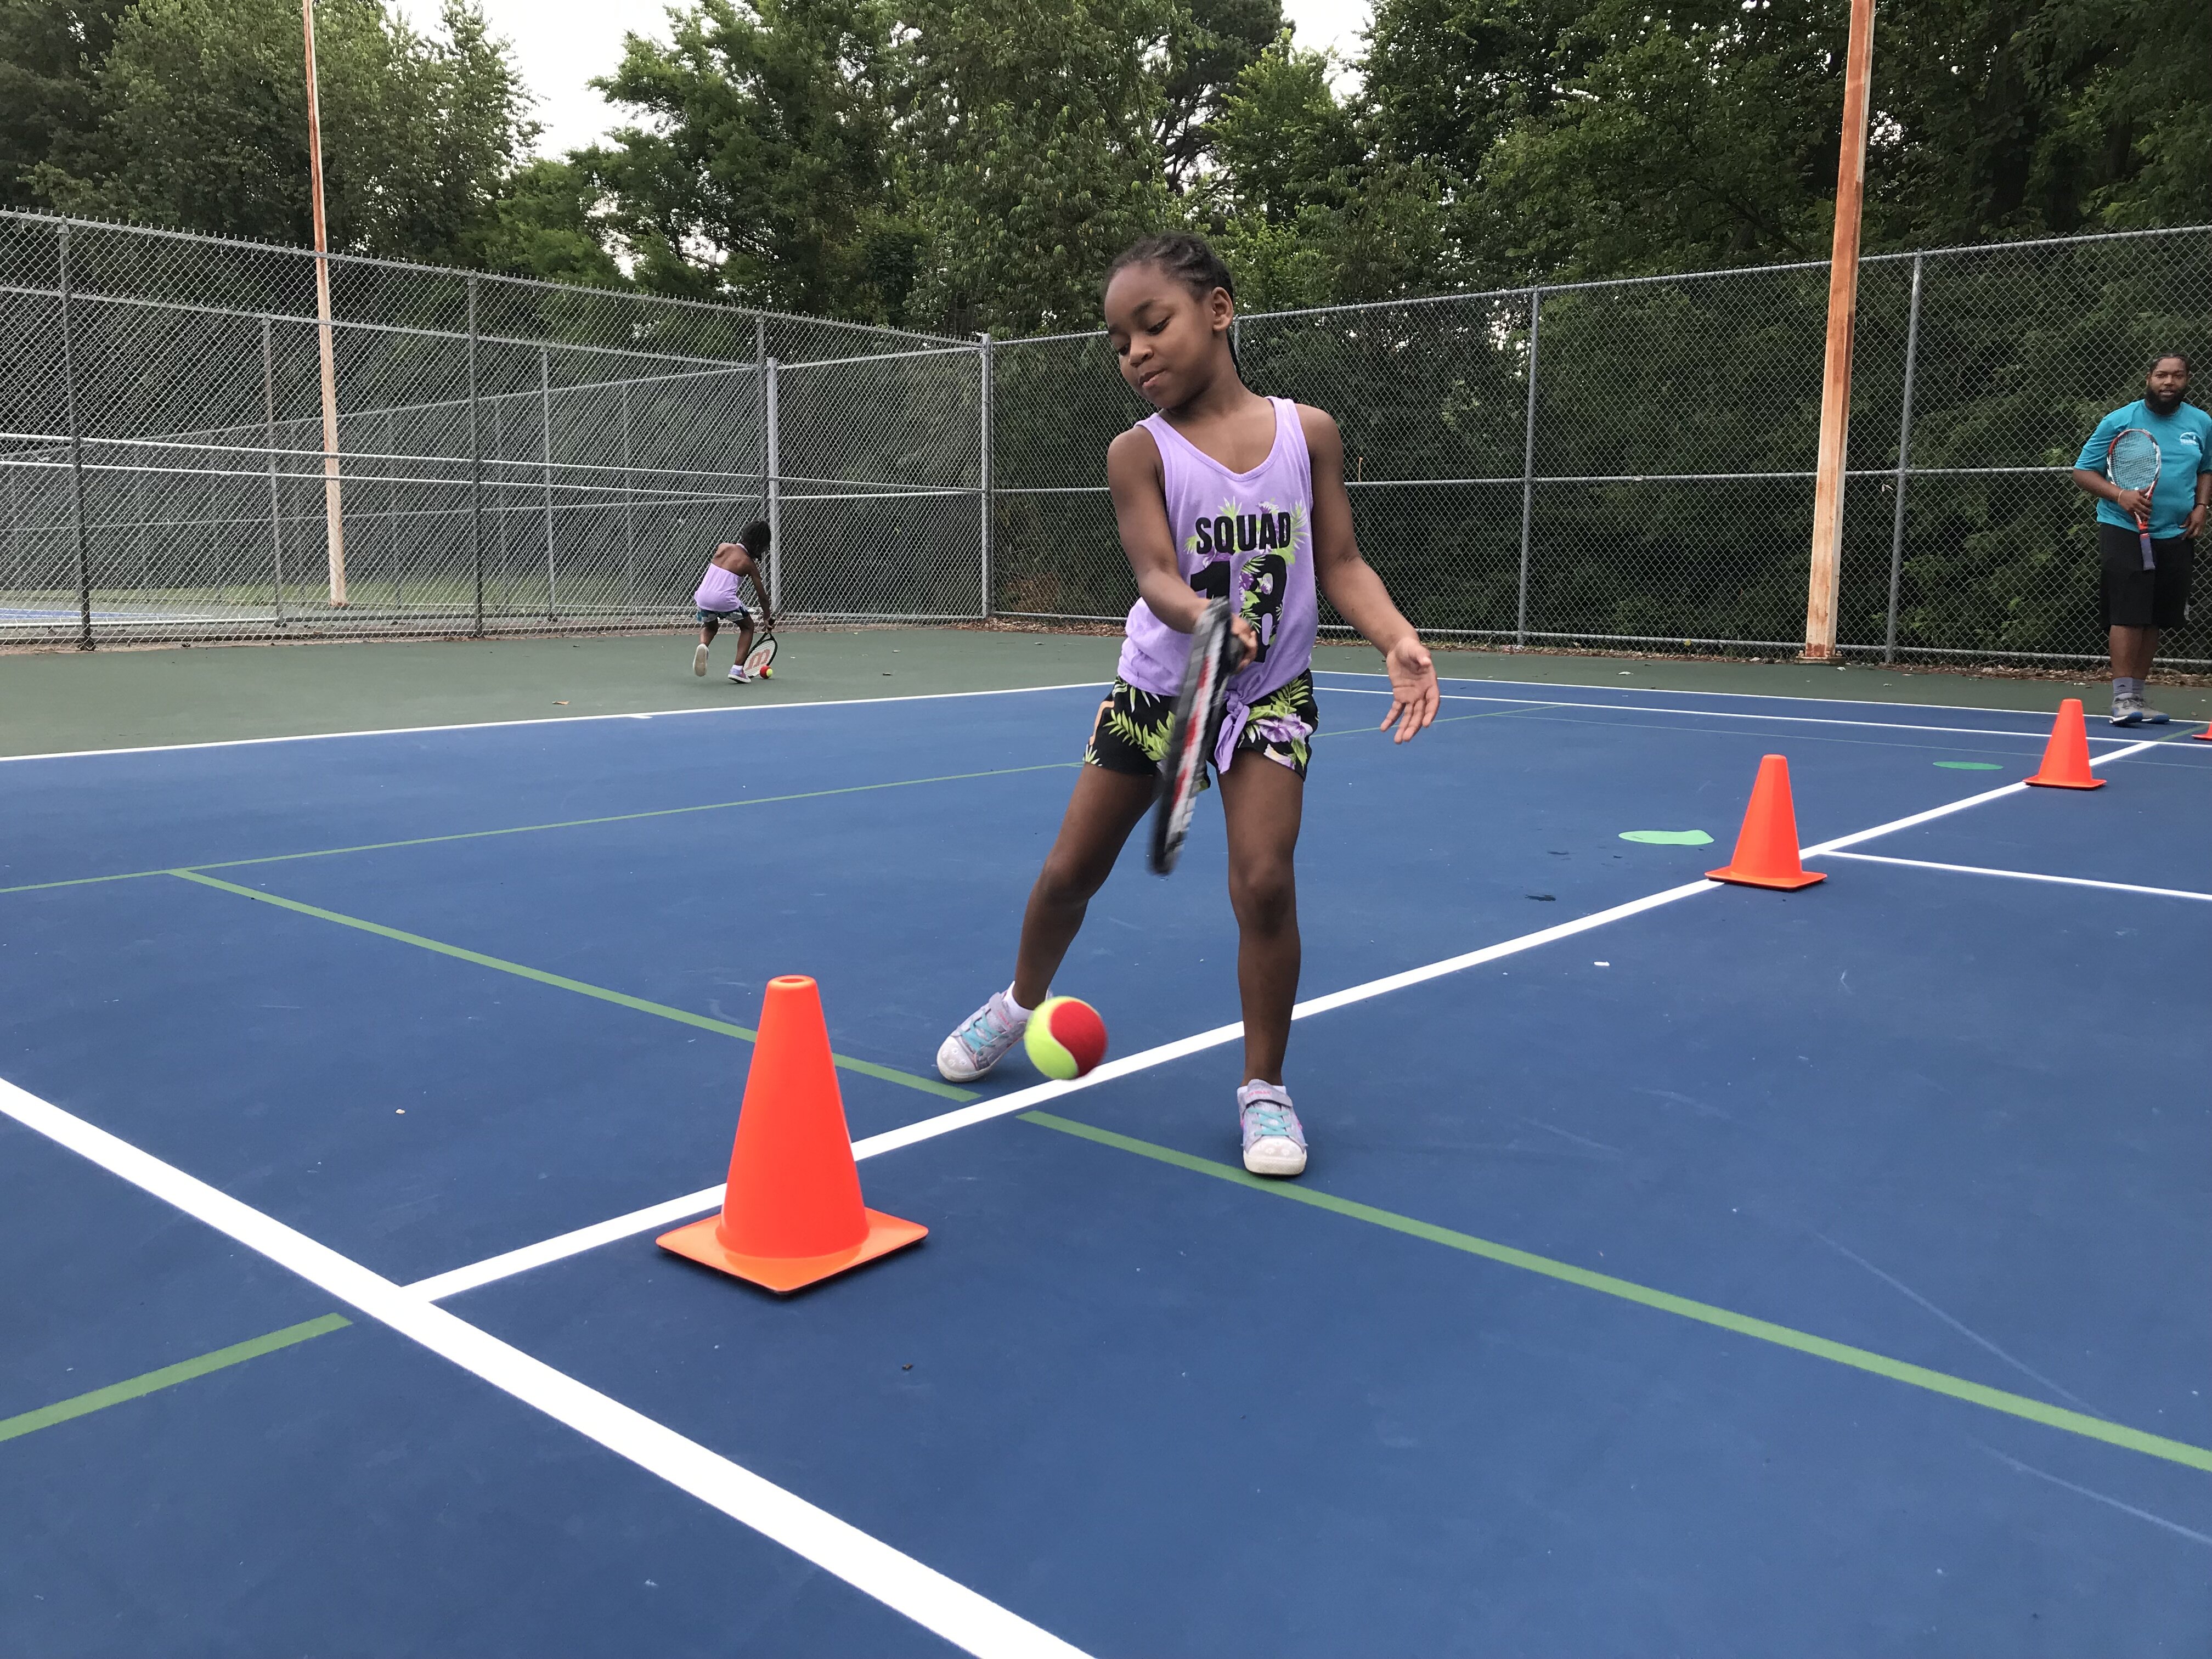 Aylah Sanders participates in a tennis skills drill during Tennis Memphis' Family Play Day, held on August 3 at the city’s municipal tennis centers. (Tennis Memphis)